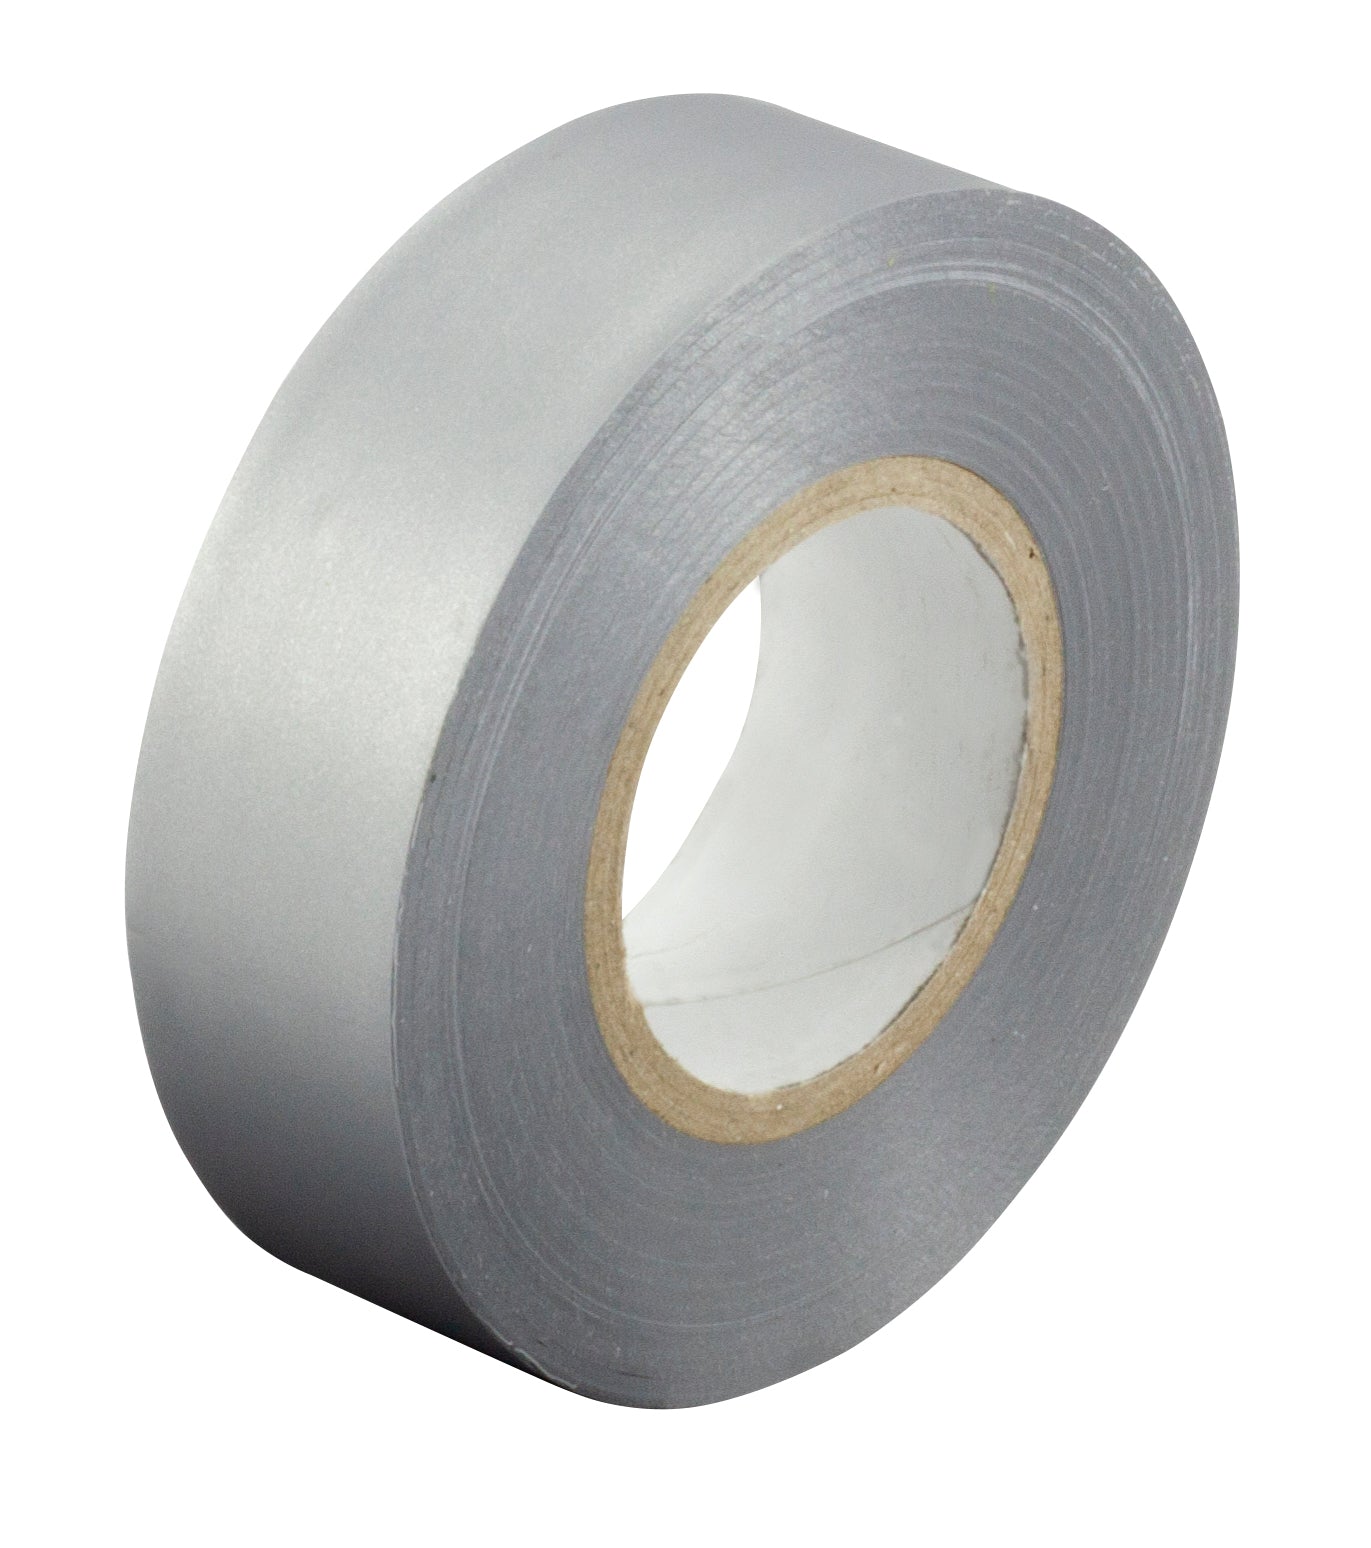 PVC Tape Size: 19mmx20m Roll - Grey - Pack of 10